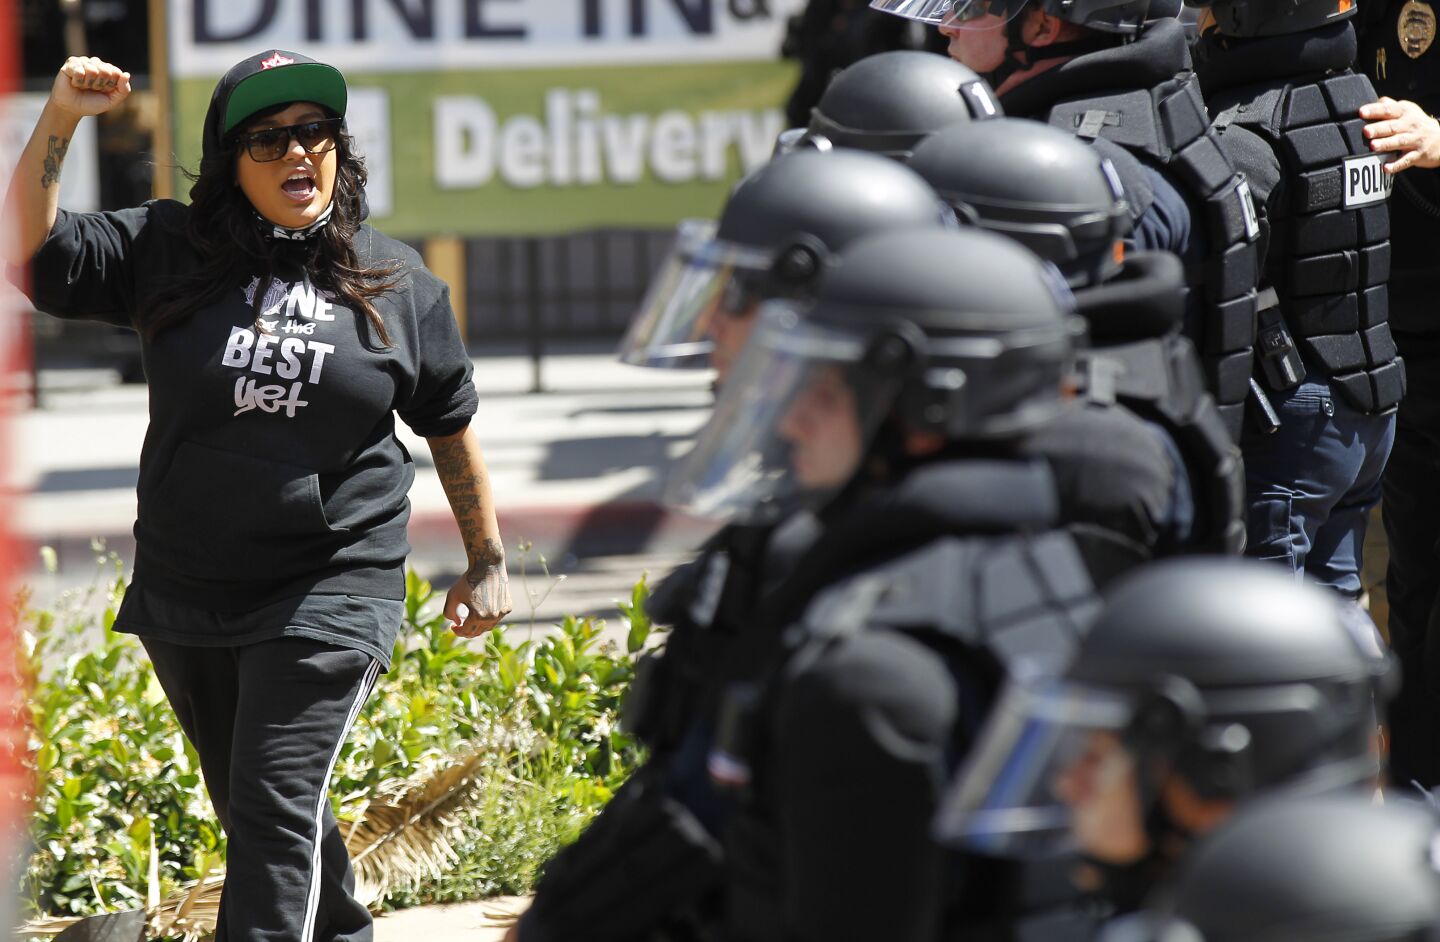 A protester yells at San Diego police in downtown San Diego on May 31, 2020. The group was protesting the death of George Floyd.